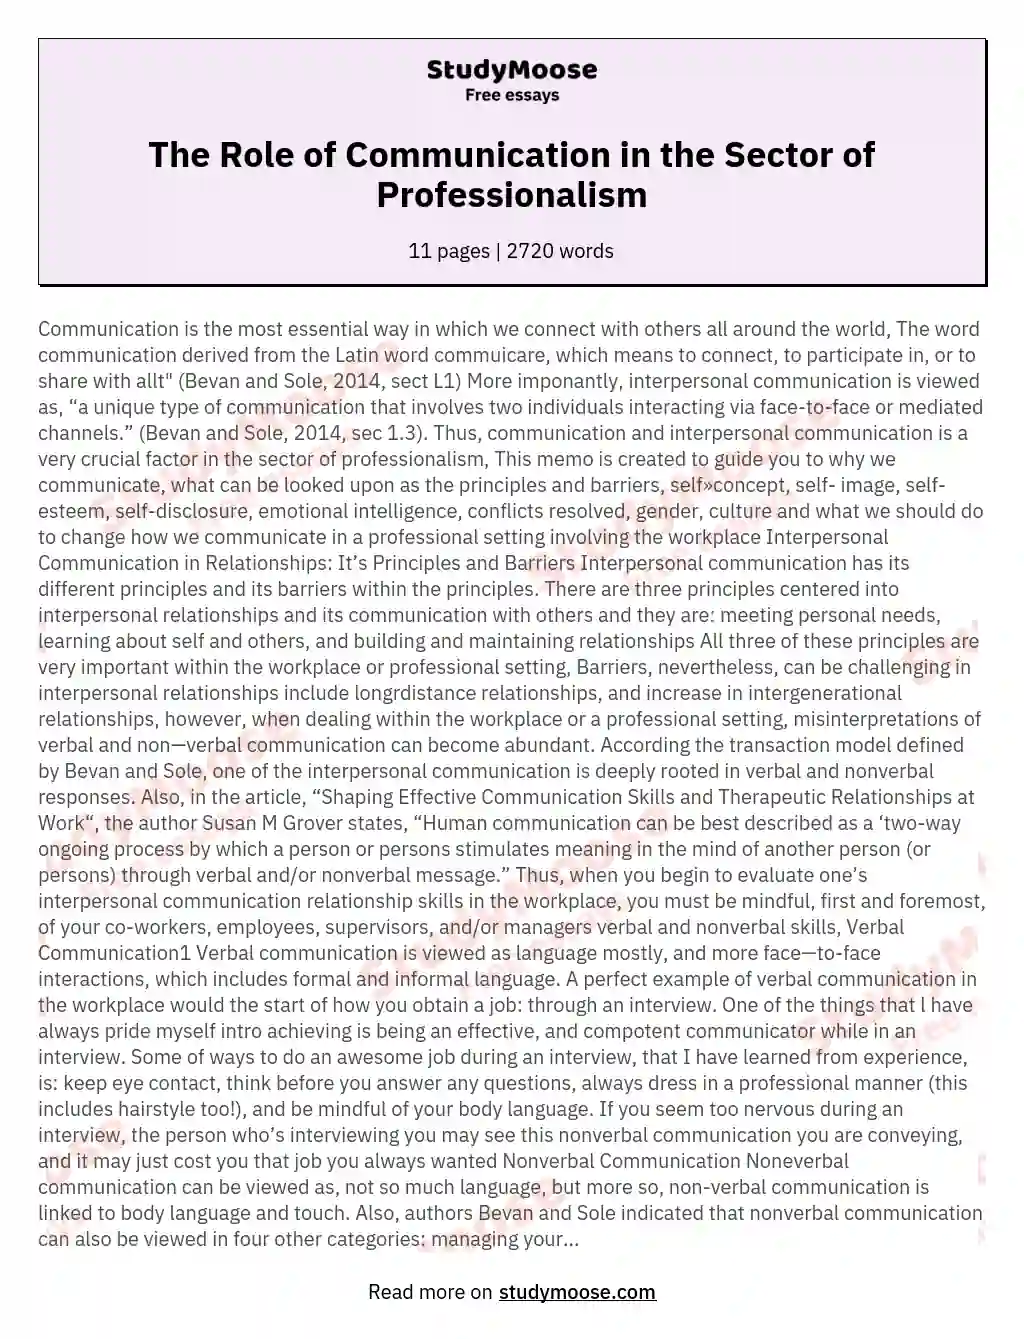 The Role of Communication in the Sector of Professionalism essay